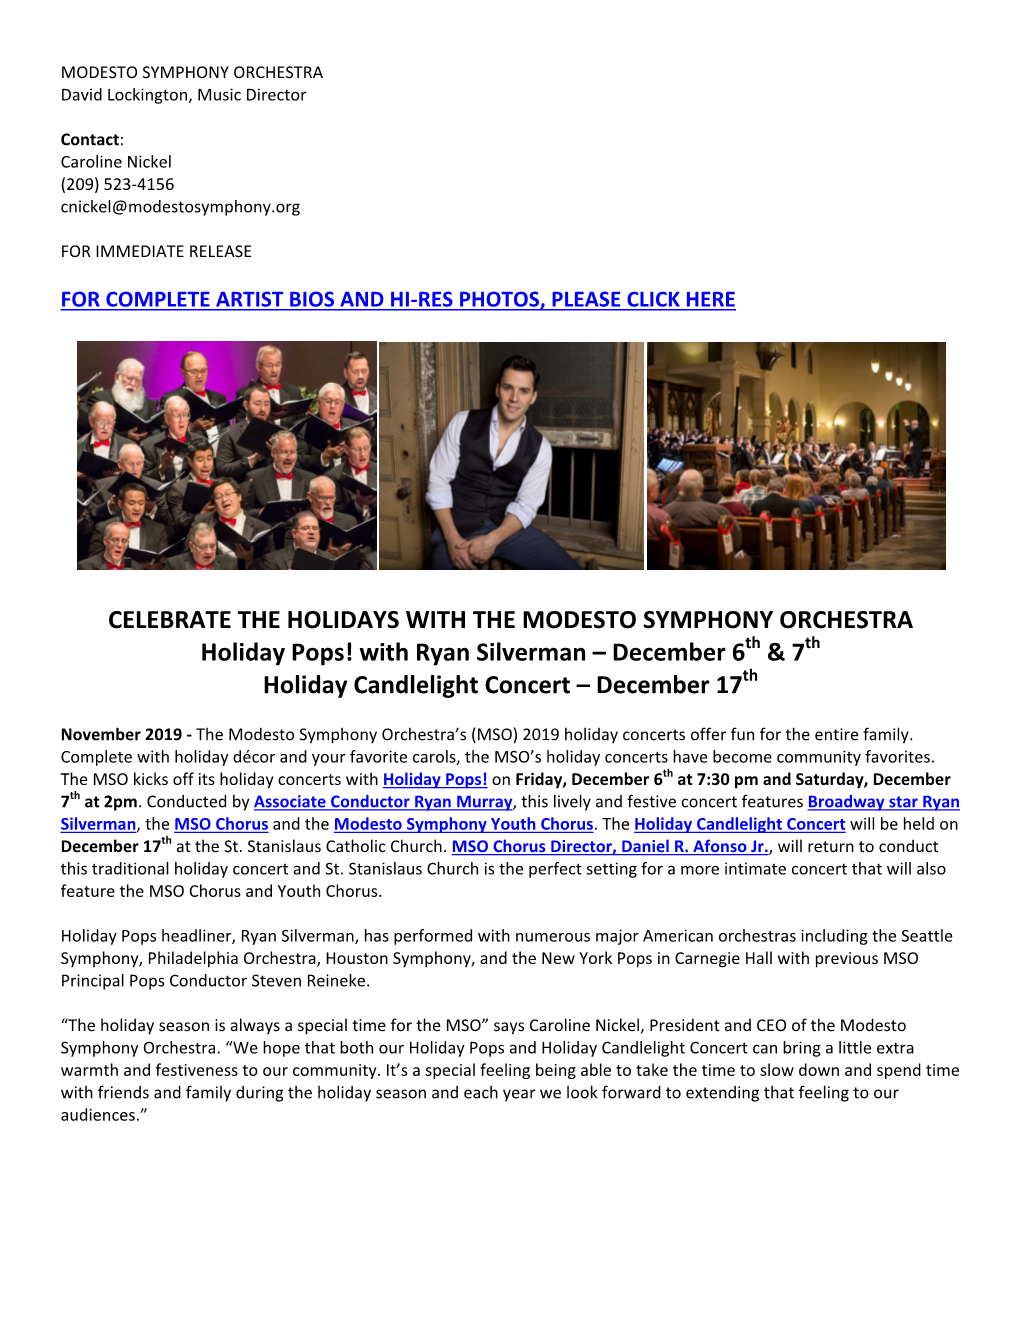 CELEBRATE the HOLIDAYS with the MODESTO SYMPHONY ORCHESTRA Holiday Pops! with Ryan Silverman – December 6Th & 7Th Holiday Candlelight Concert – December 17Th